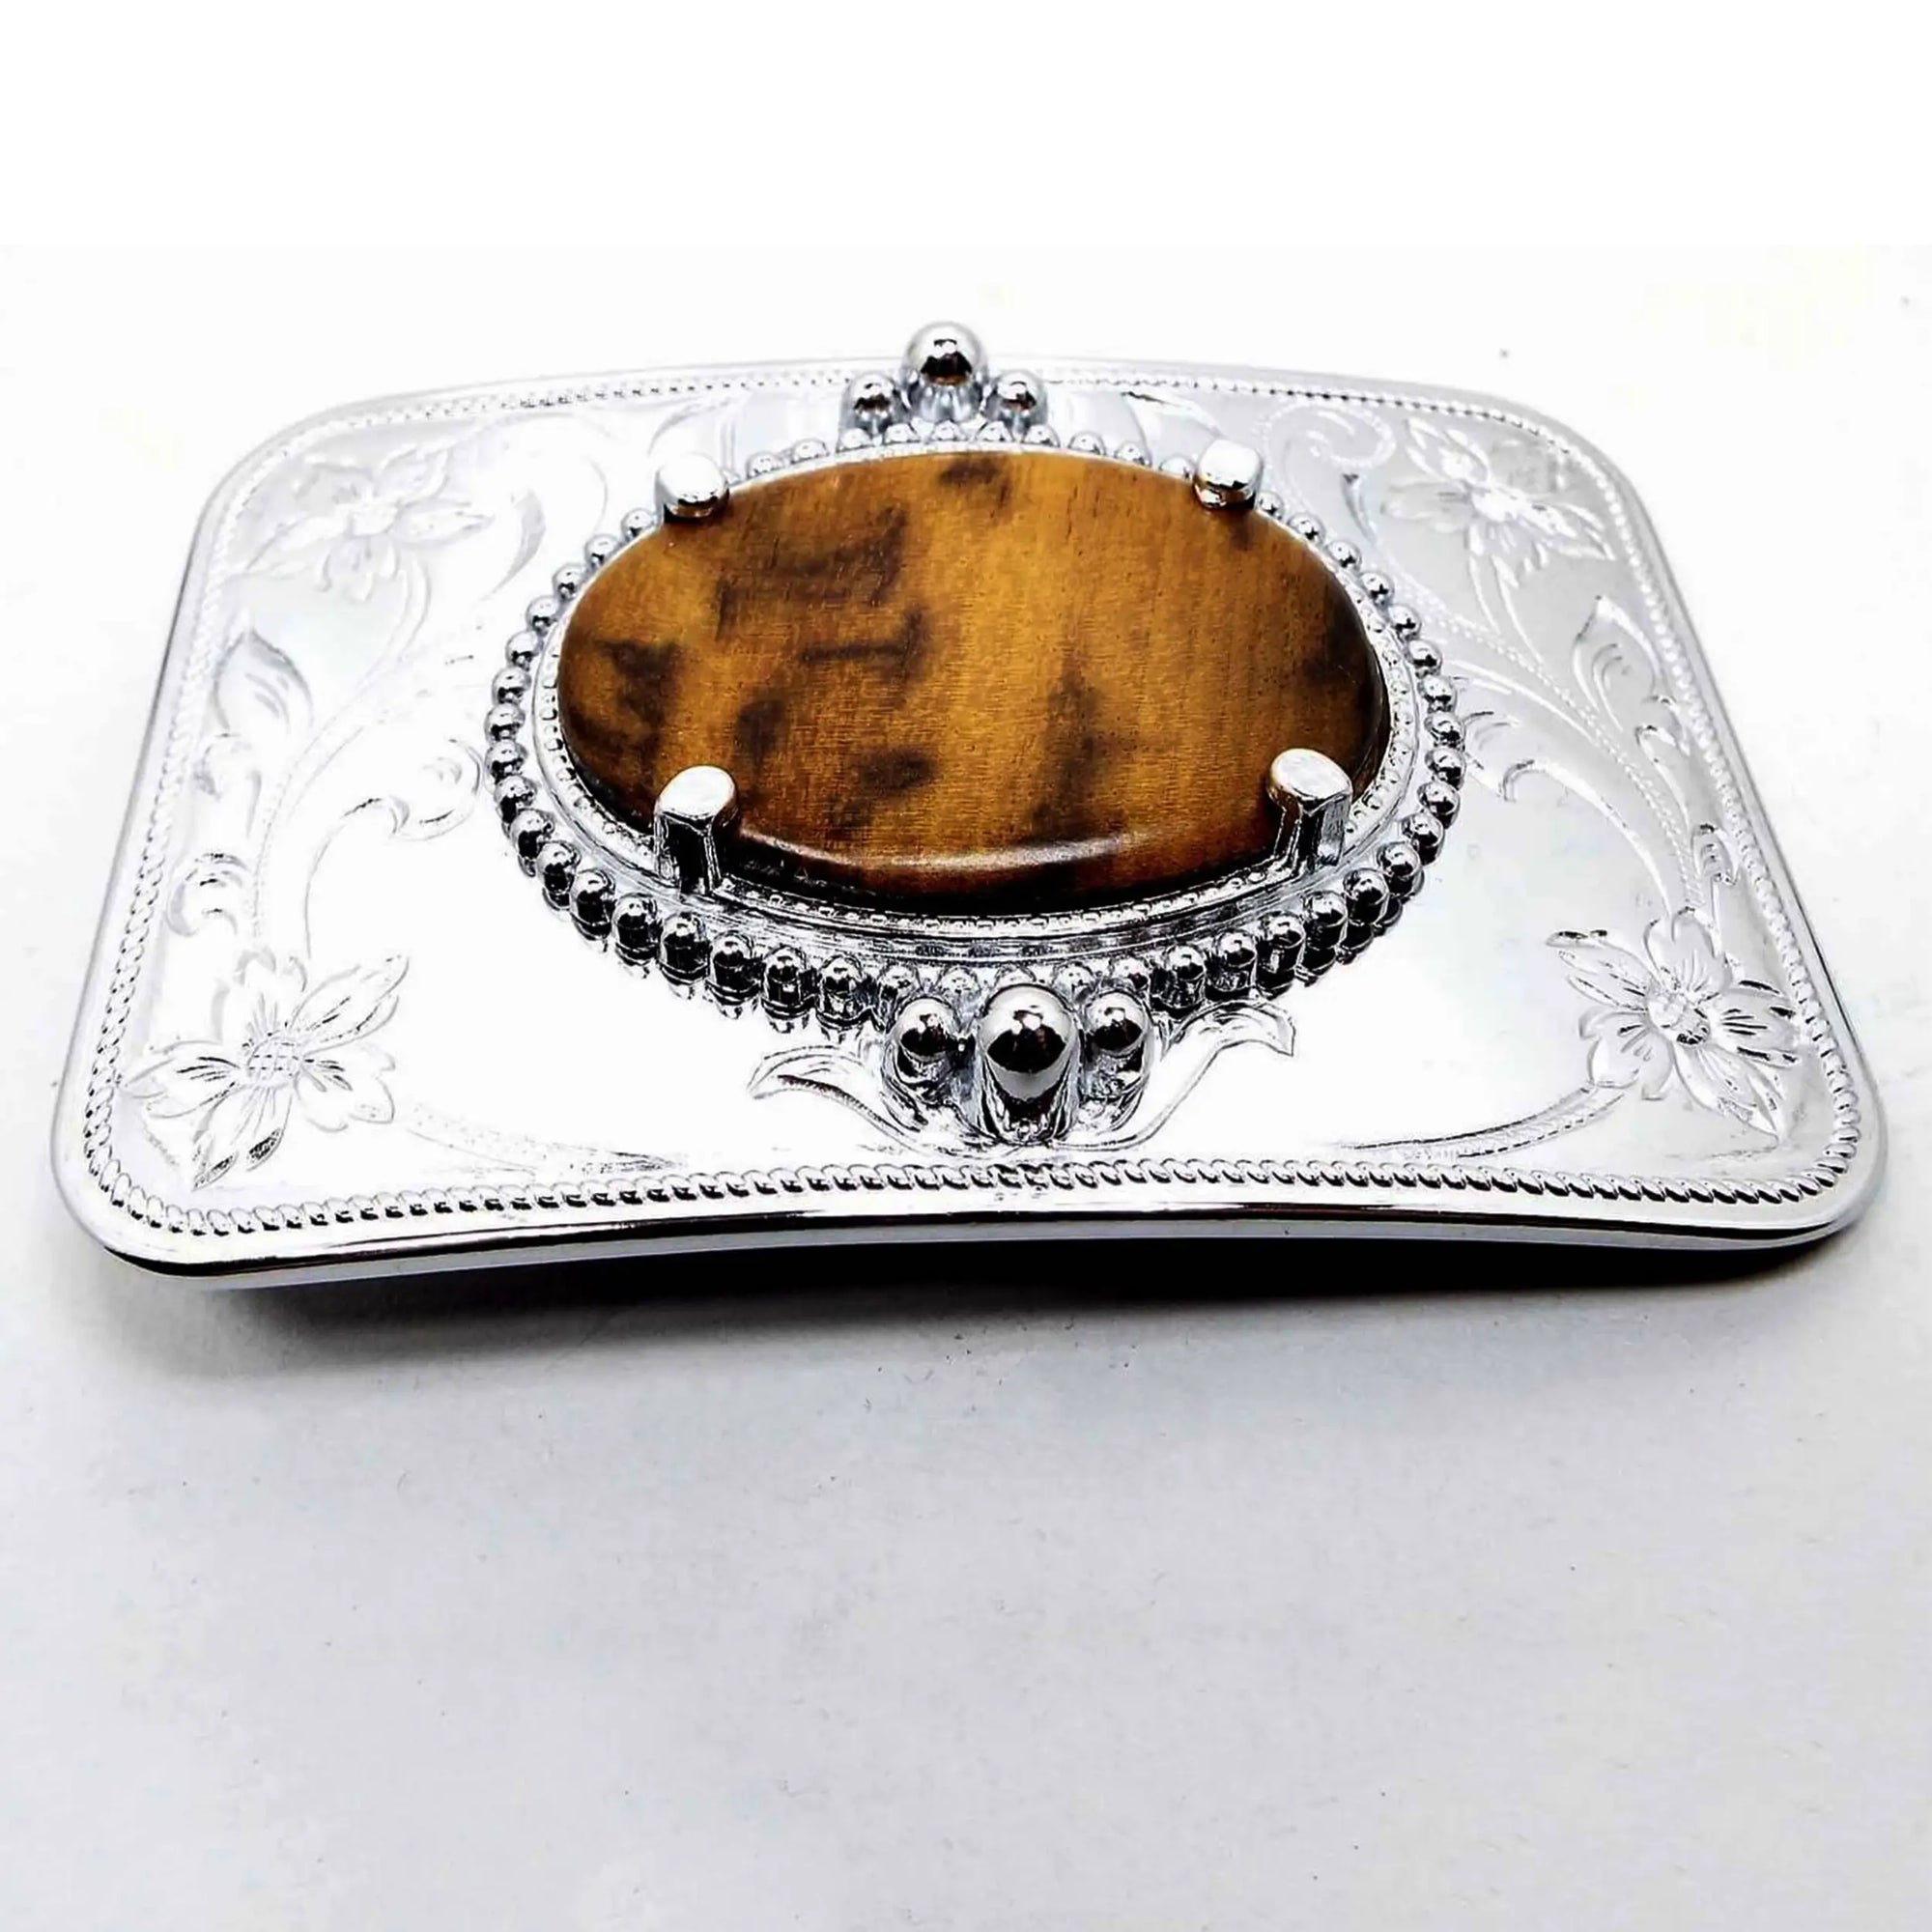 Front view of the retro vintage Reddscraft myrtlewood vintage belt buckle. The buckle is silver tone in color with a stamped floral design around the corners. The middle has a prong set oval cab of myrtlewood wood in shades of brown.